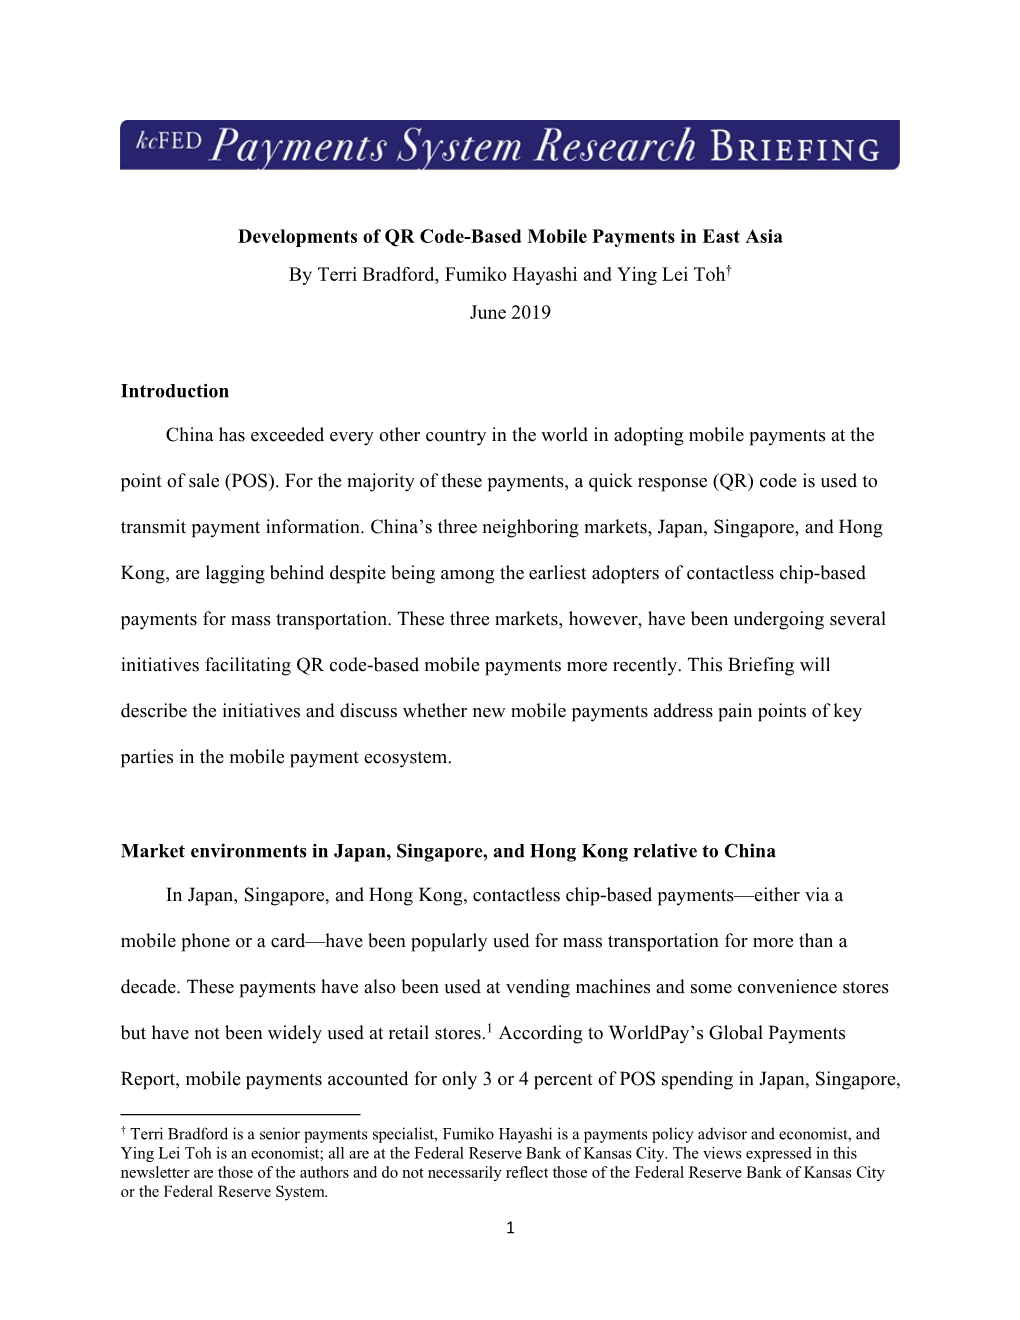 Developments of QR Code-Based Mobile Payments in East Asia by Terri Bradford, Fumiko Hayashi and Ying Lei Toh† June 2019